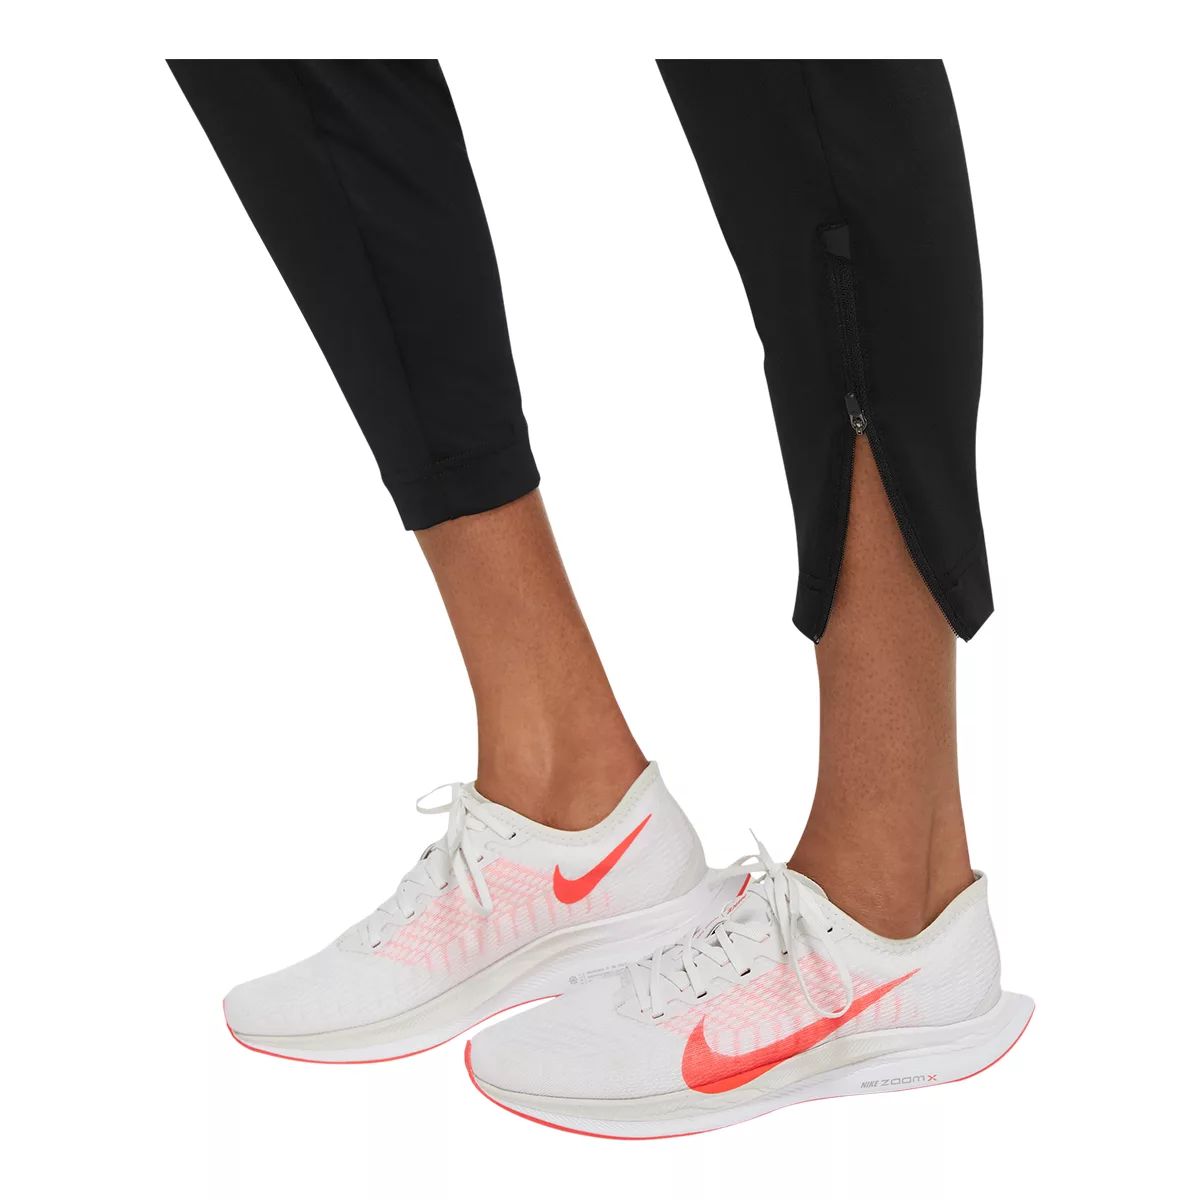 Womens Running Shoes, Trainers & Clothing